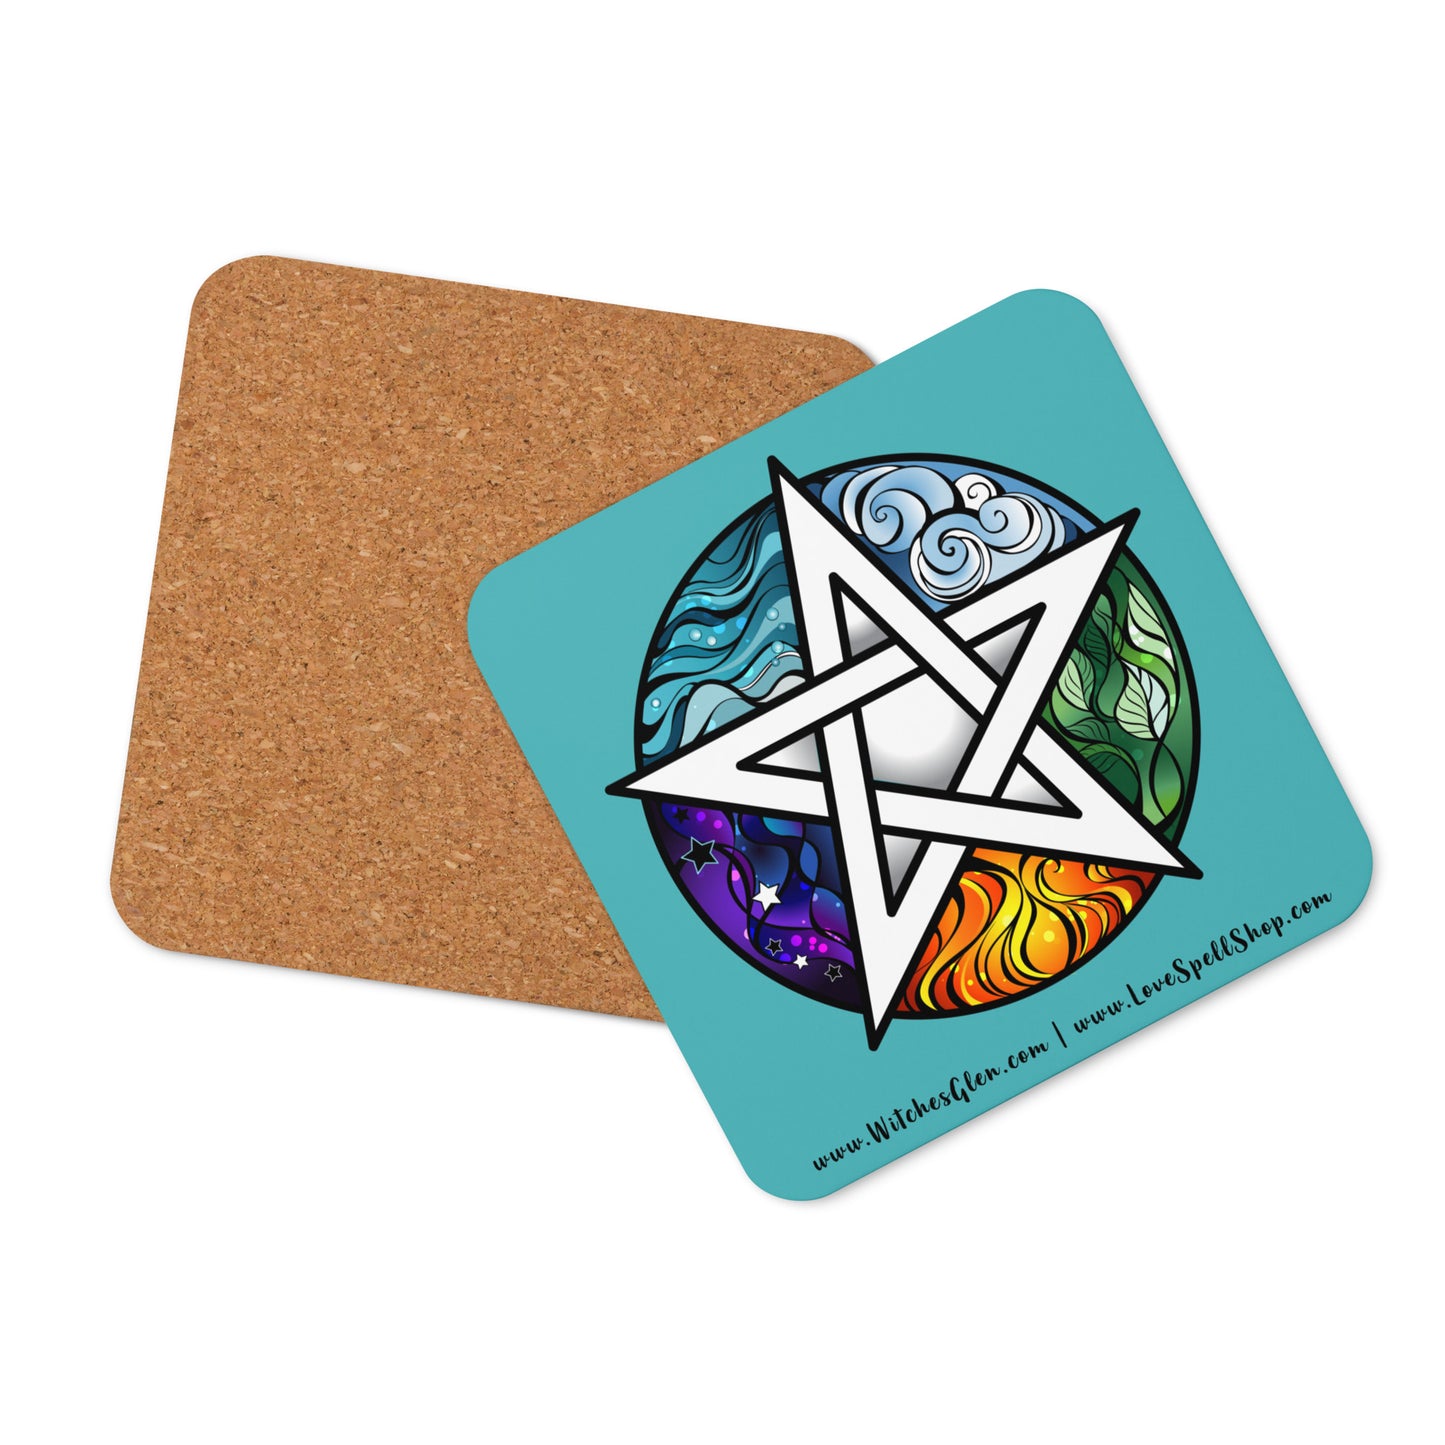 Cork-back Coaster: Pentacle and Elements (teal water)